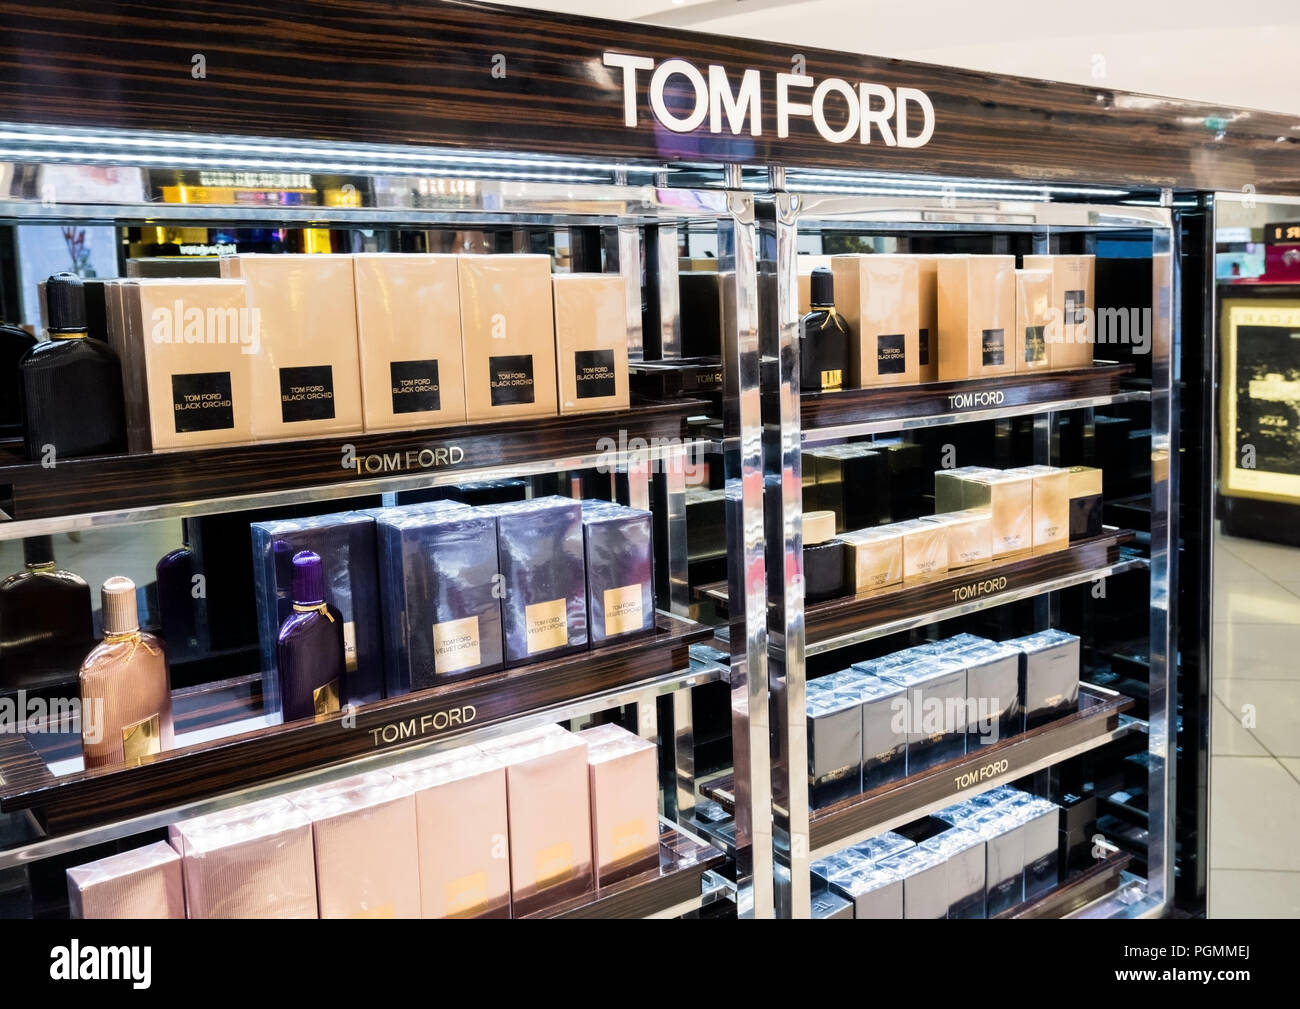 436 Tom Ford Store Images, Stock Photos, 3D objects, & Vectors